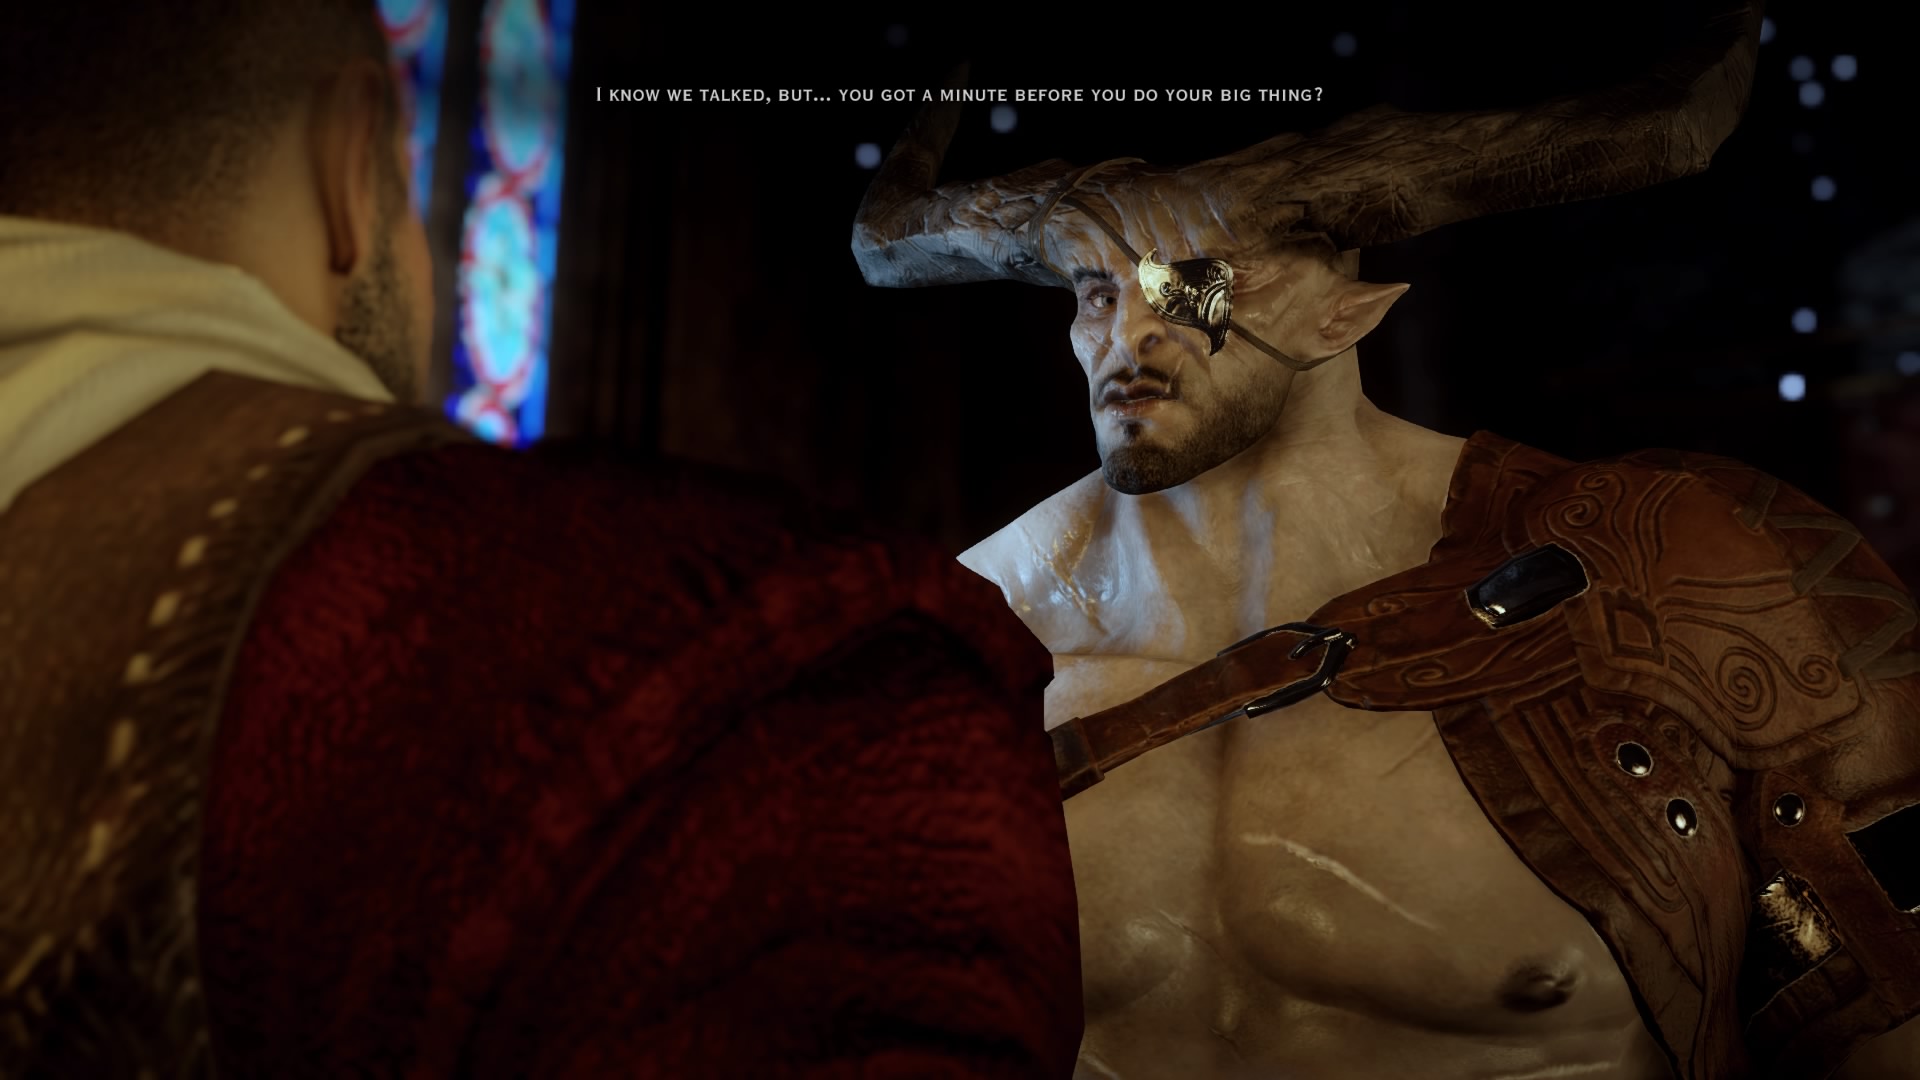 A in game dialogue between a main character and Iron bull where bull asks the player to talk for a minute before heading off.